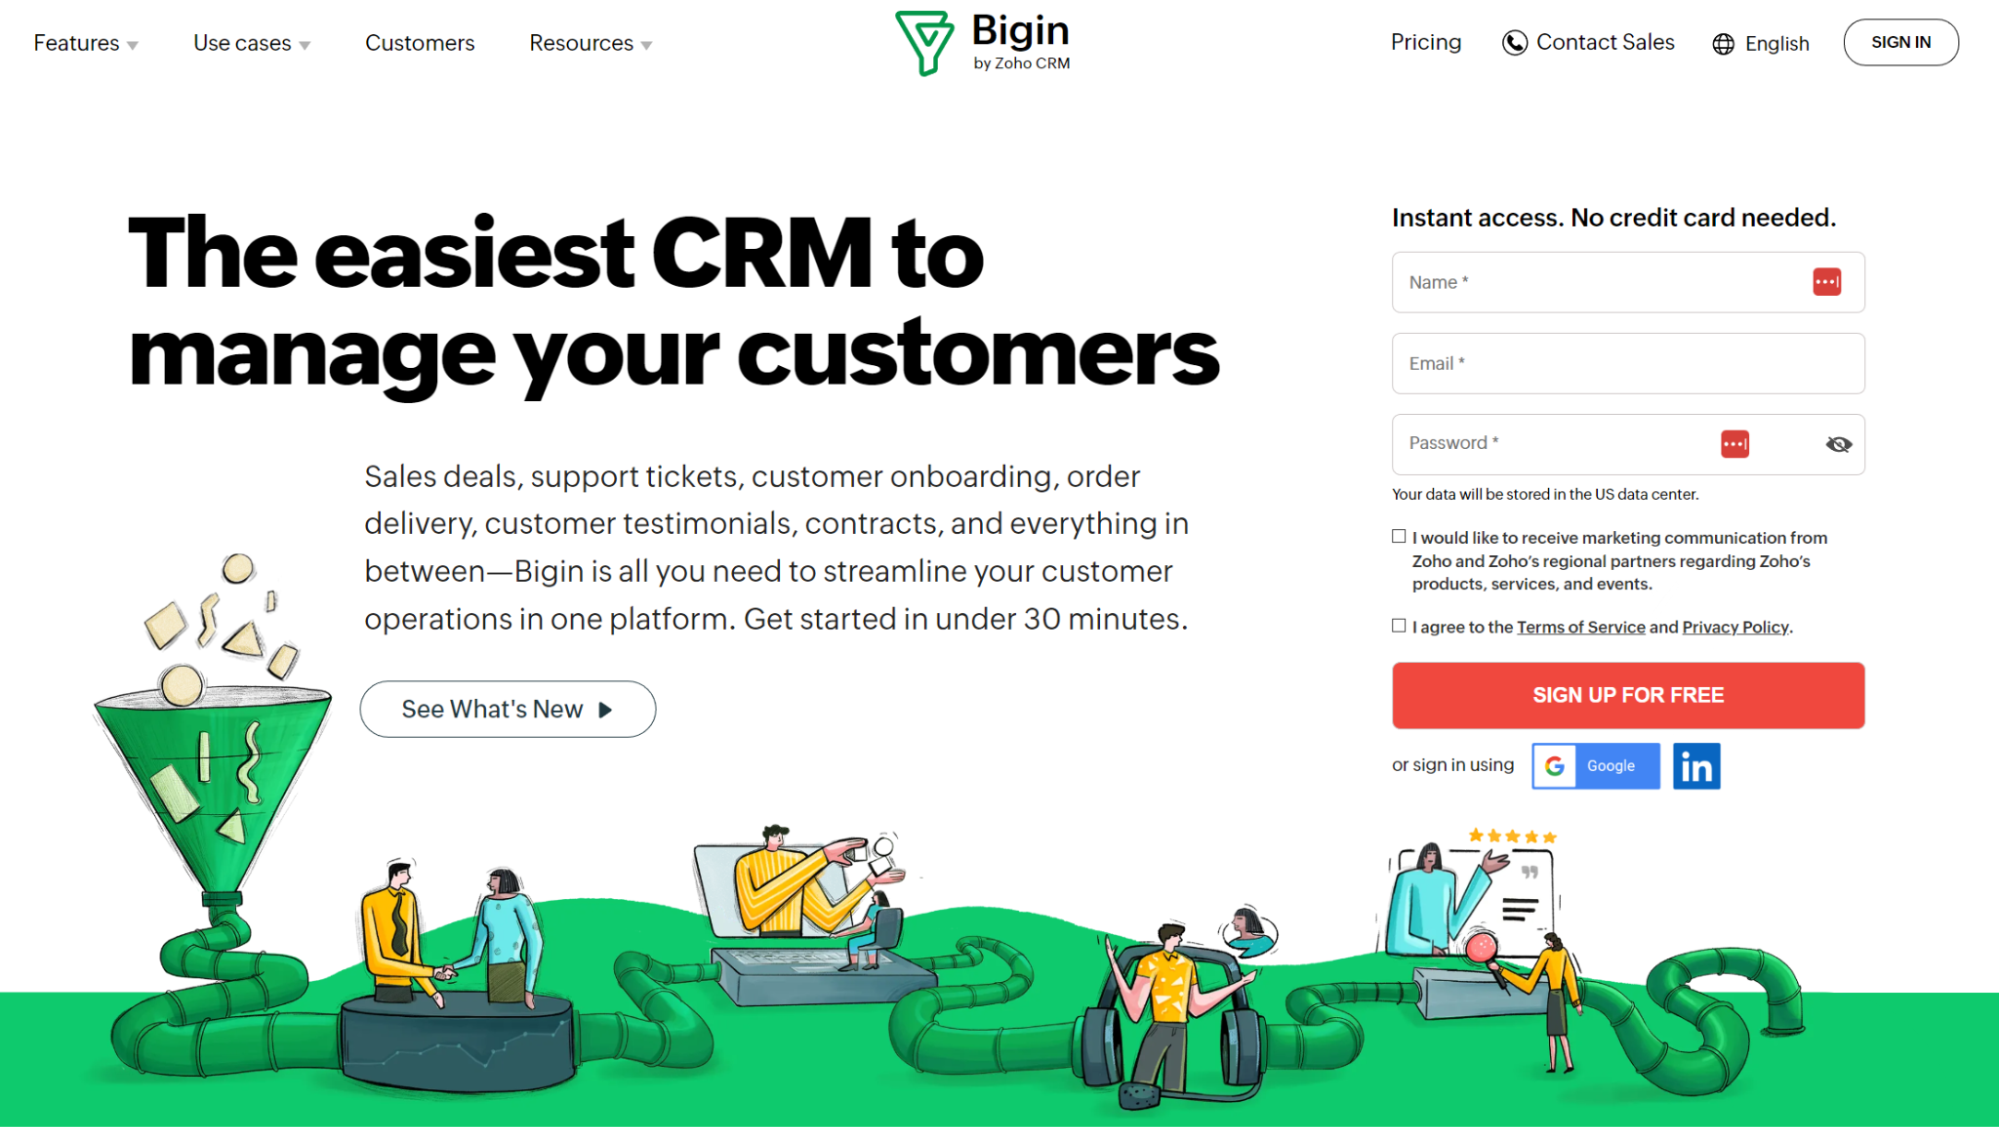 the Bigin landing page is designed to quickly convert small business owners into users